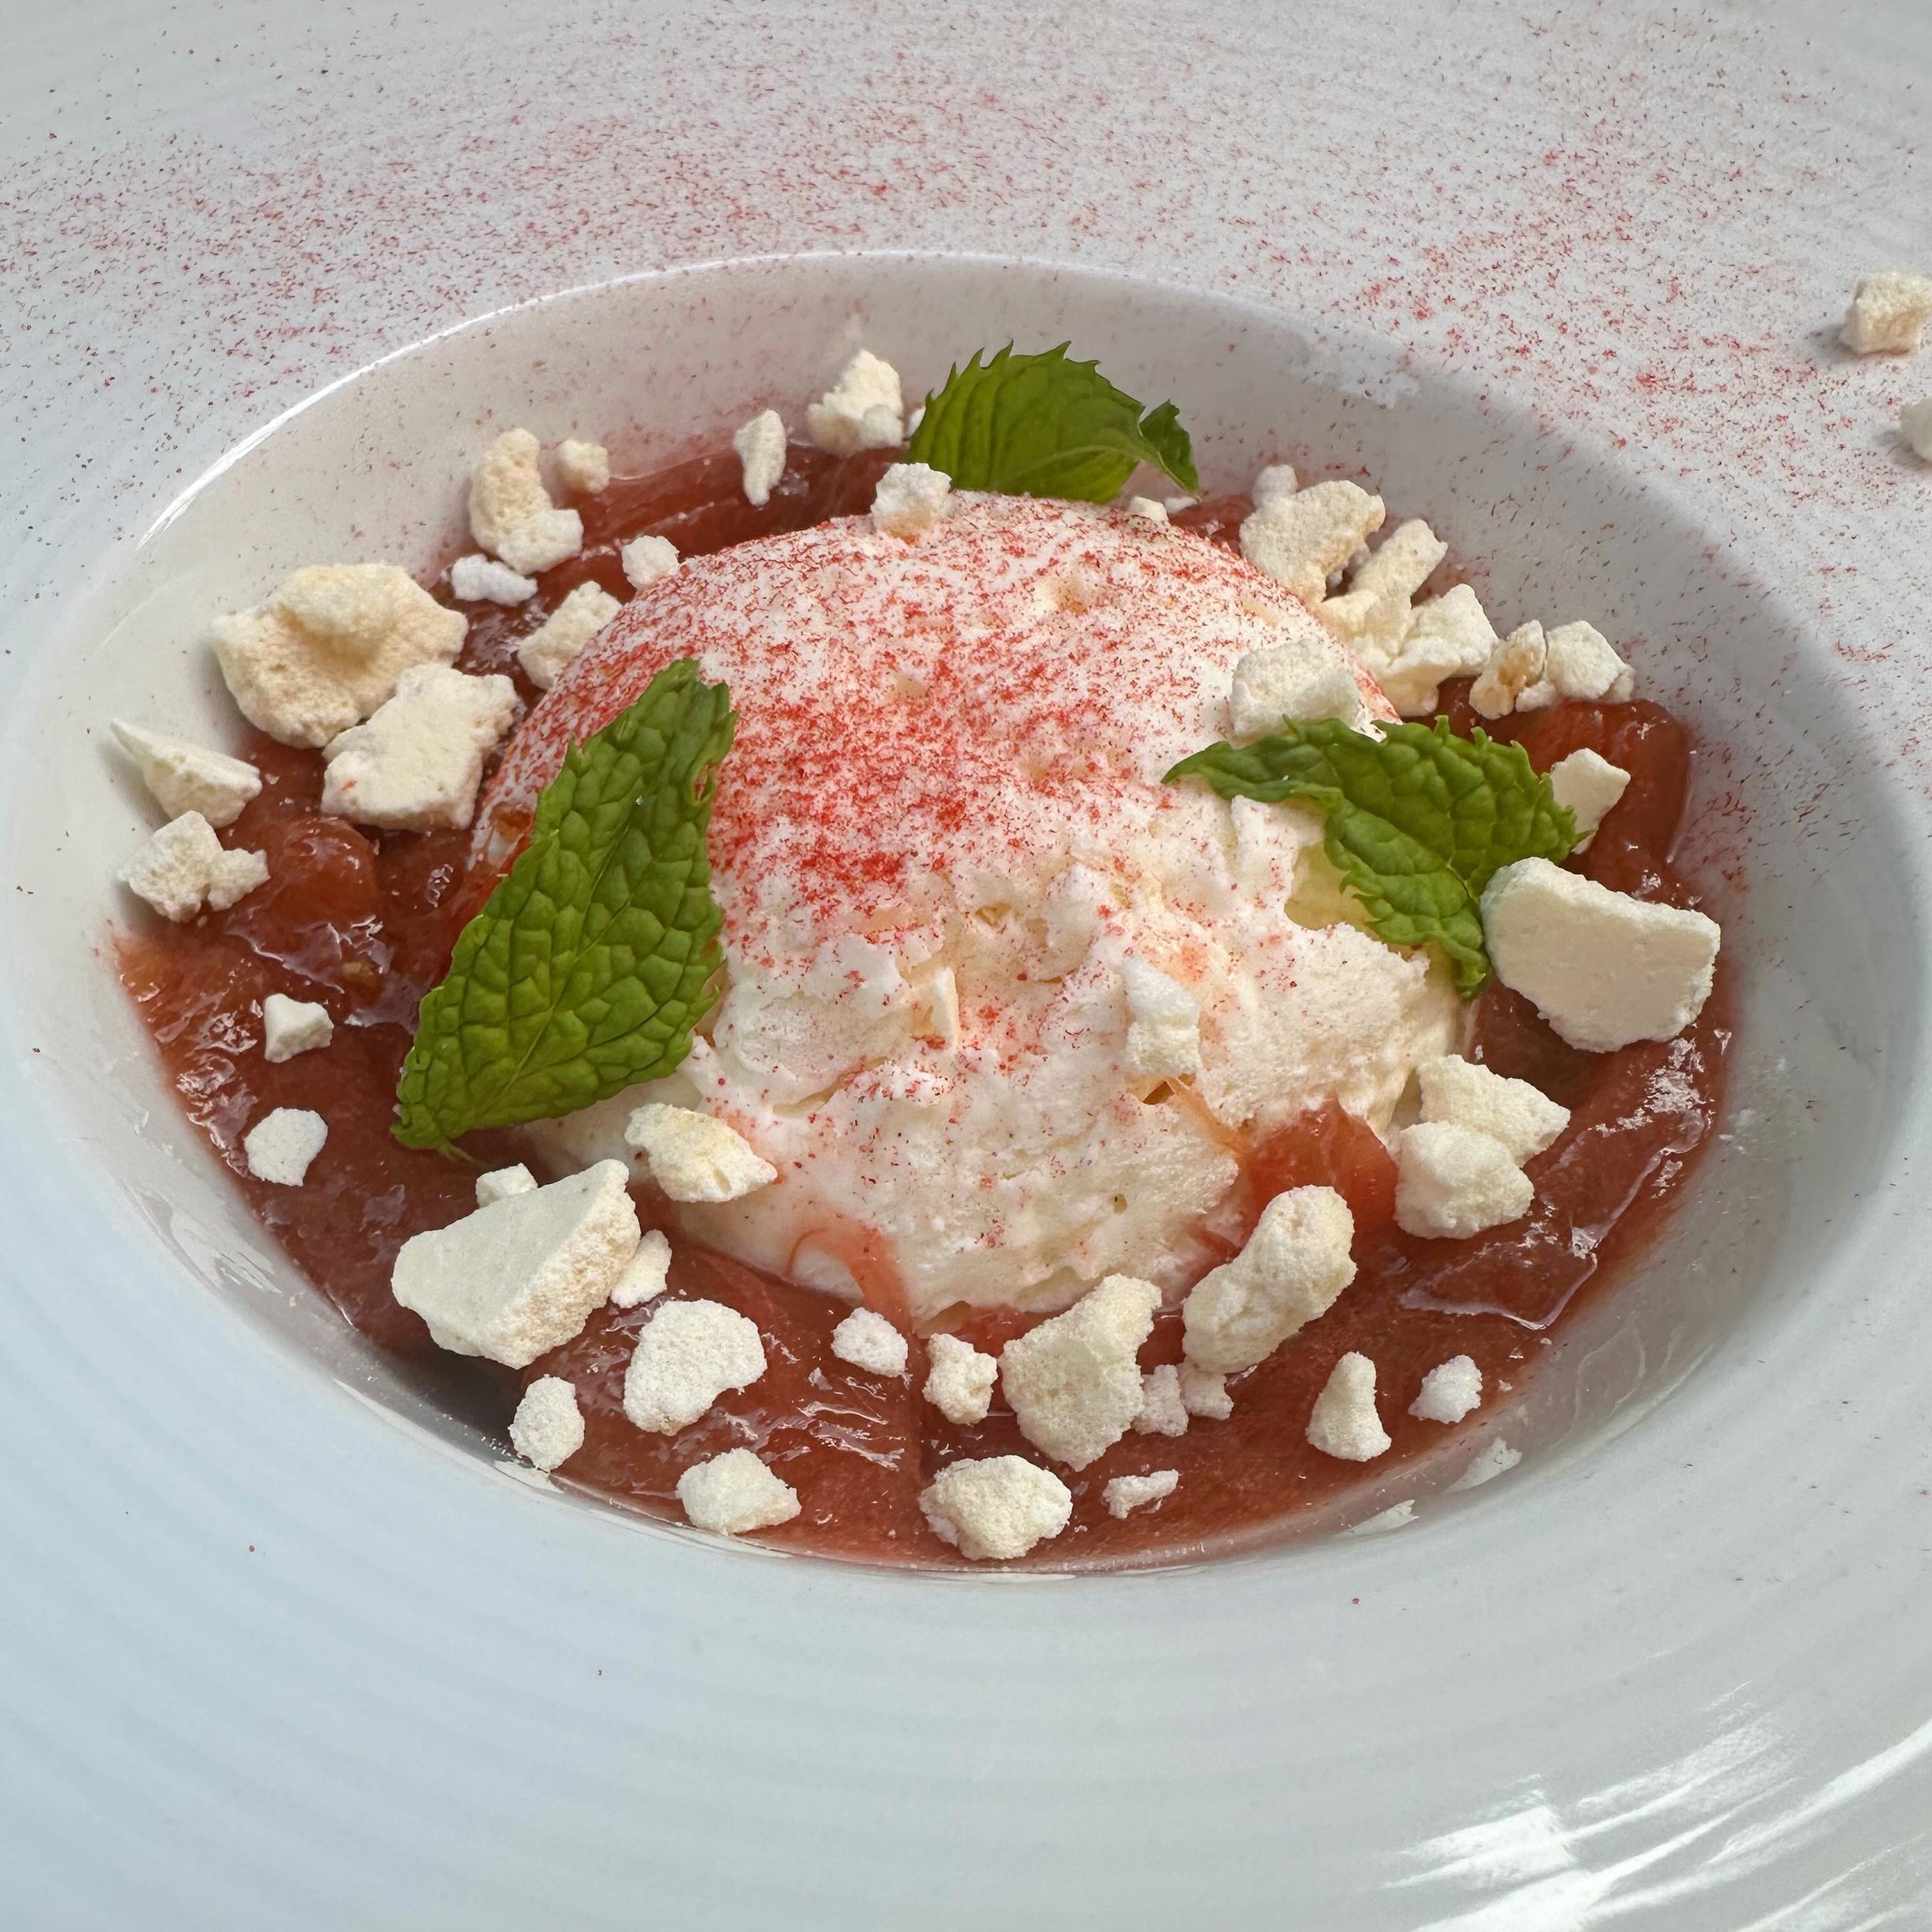 ginger oat streusel | rhubarb compote | baked meringue crumbles | frozen mousse | strawberry dust